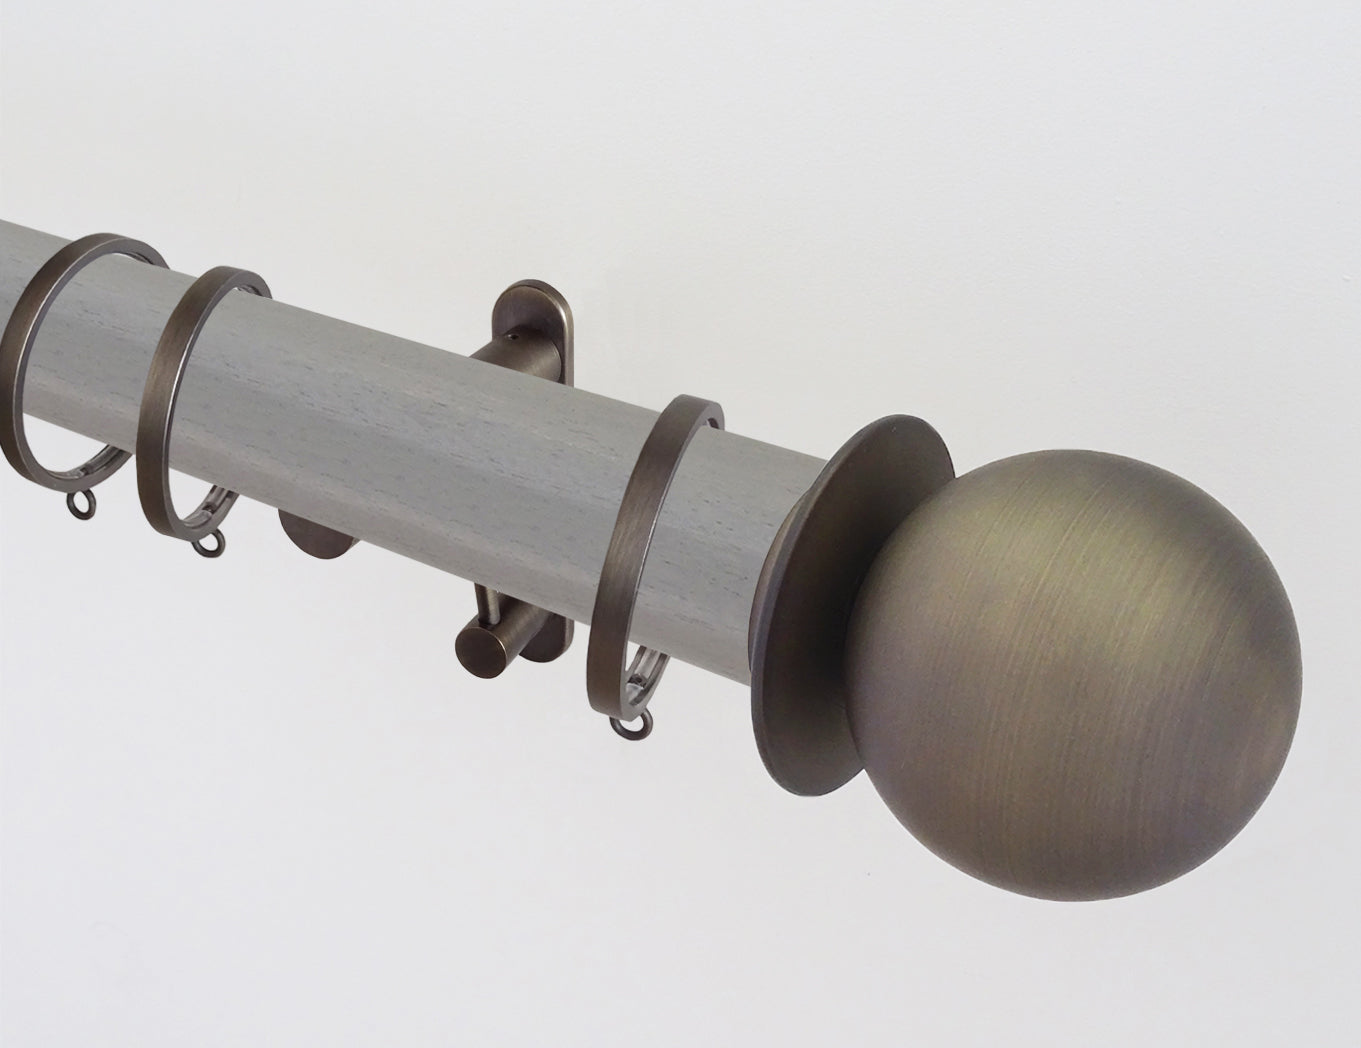 50mm dia. mouse stained wood curtain pole with metal ball finials